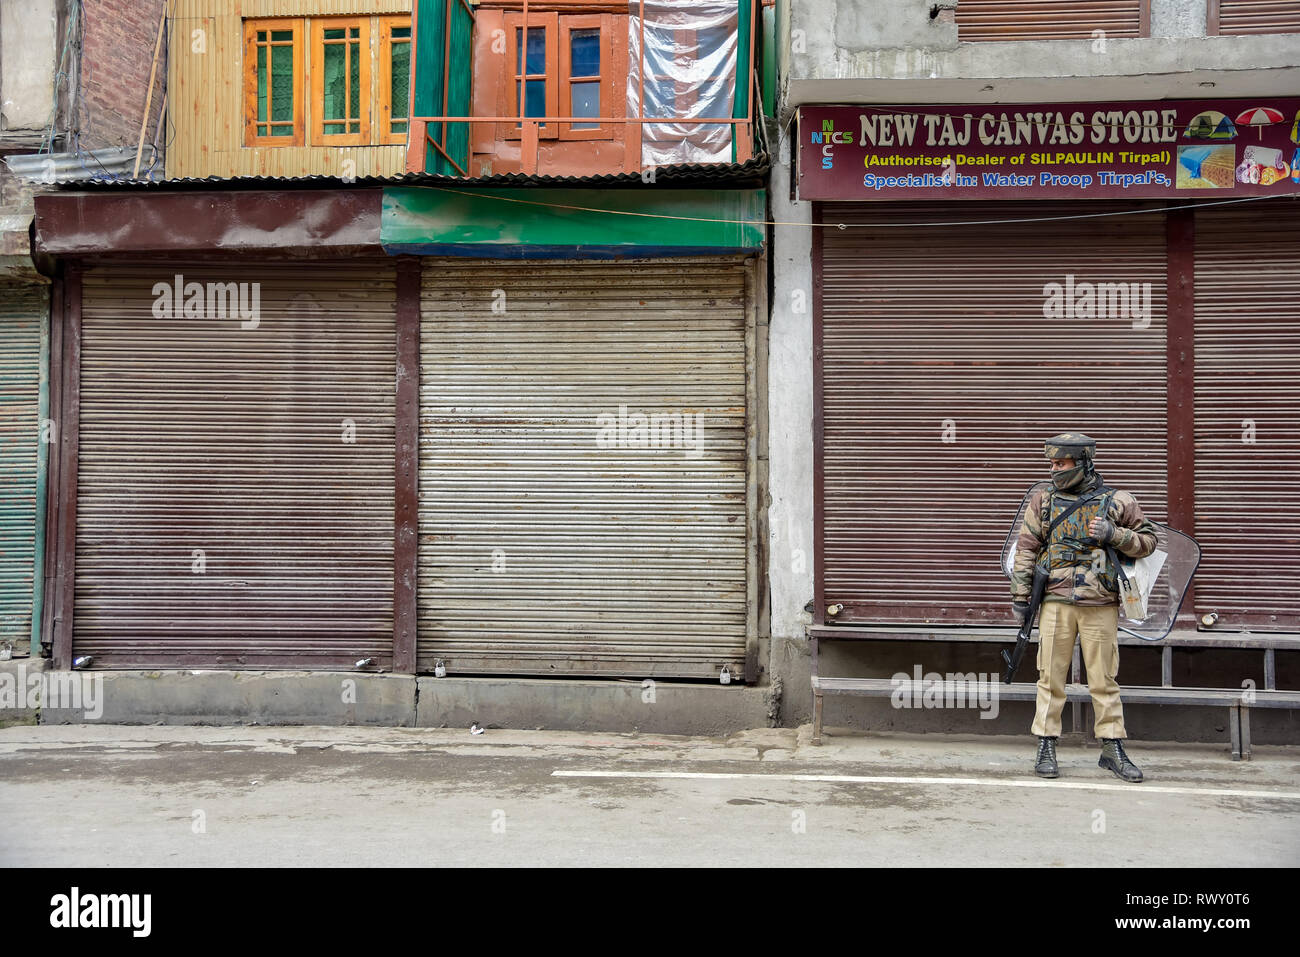 A paramilitary man seen standing on guard in-front of closed shops during the shut-down in Srinagar. A shut-down is being observed in Maisuma area of Srinagar city. Jammu and Kashmir Liberation Front chairman Yasin Malik who was detained on February 22 was booked under Public Safety Act (PSA) and shifted to Kot Balwal jail in Jammu earlier today. Stock Photo